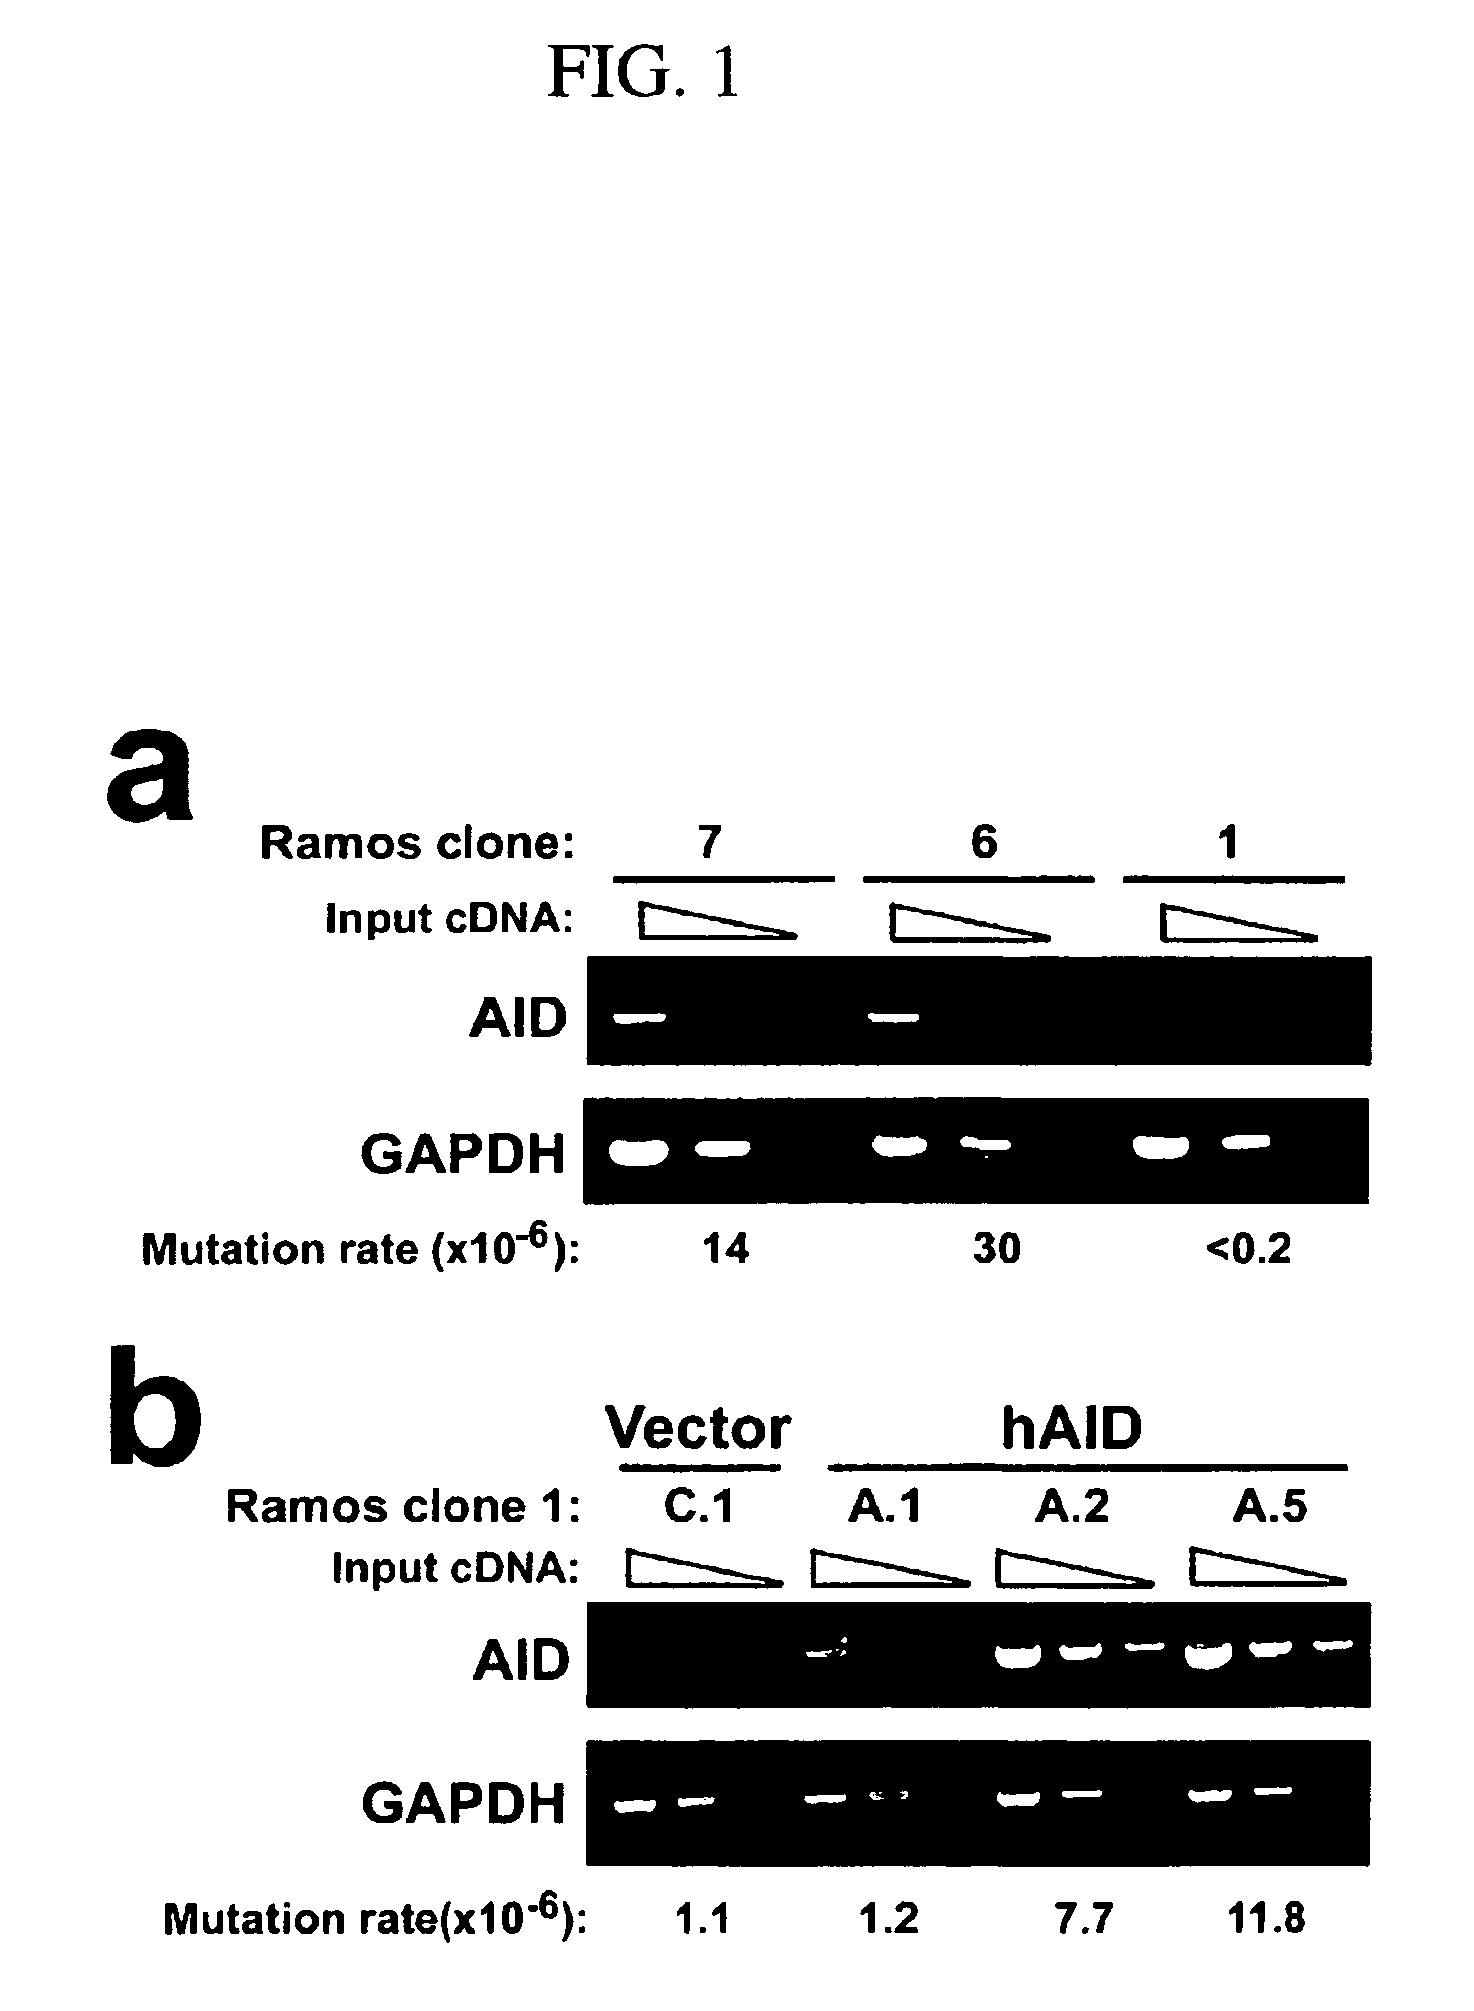 Mutations caused by activation-induced cytidine deaminase